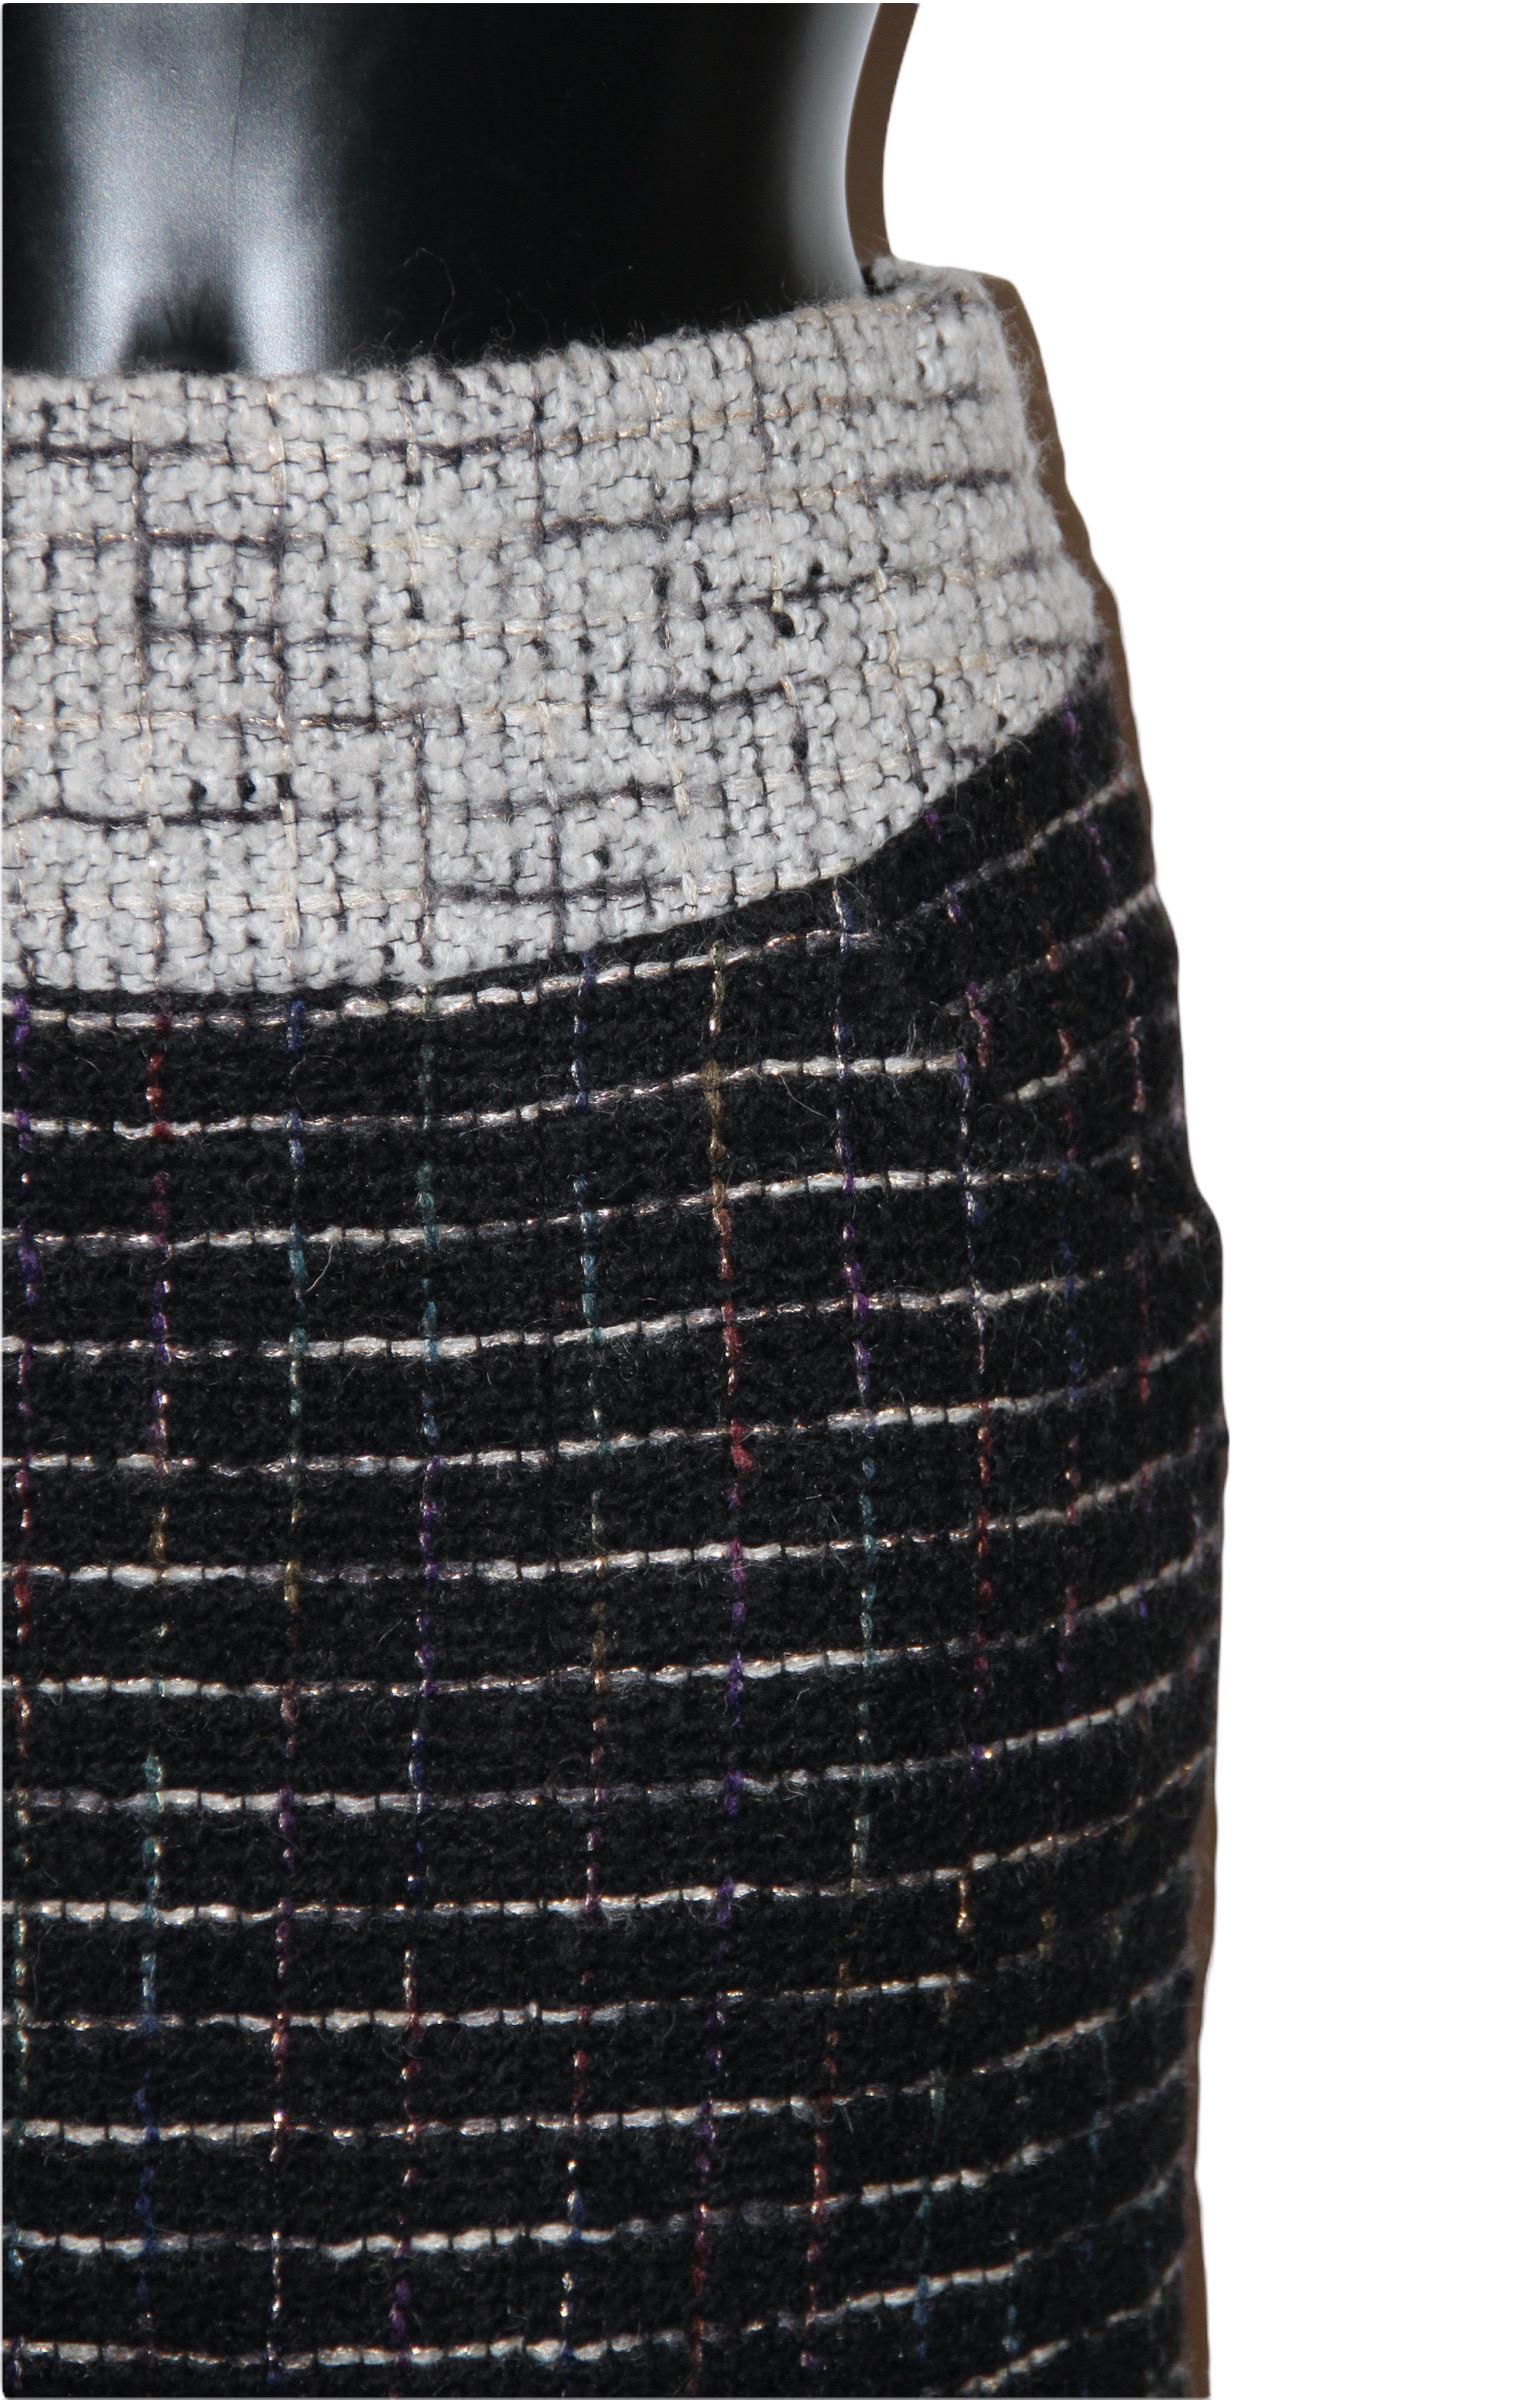 Chanel Black and White Tweed Skirt Suit  6